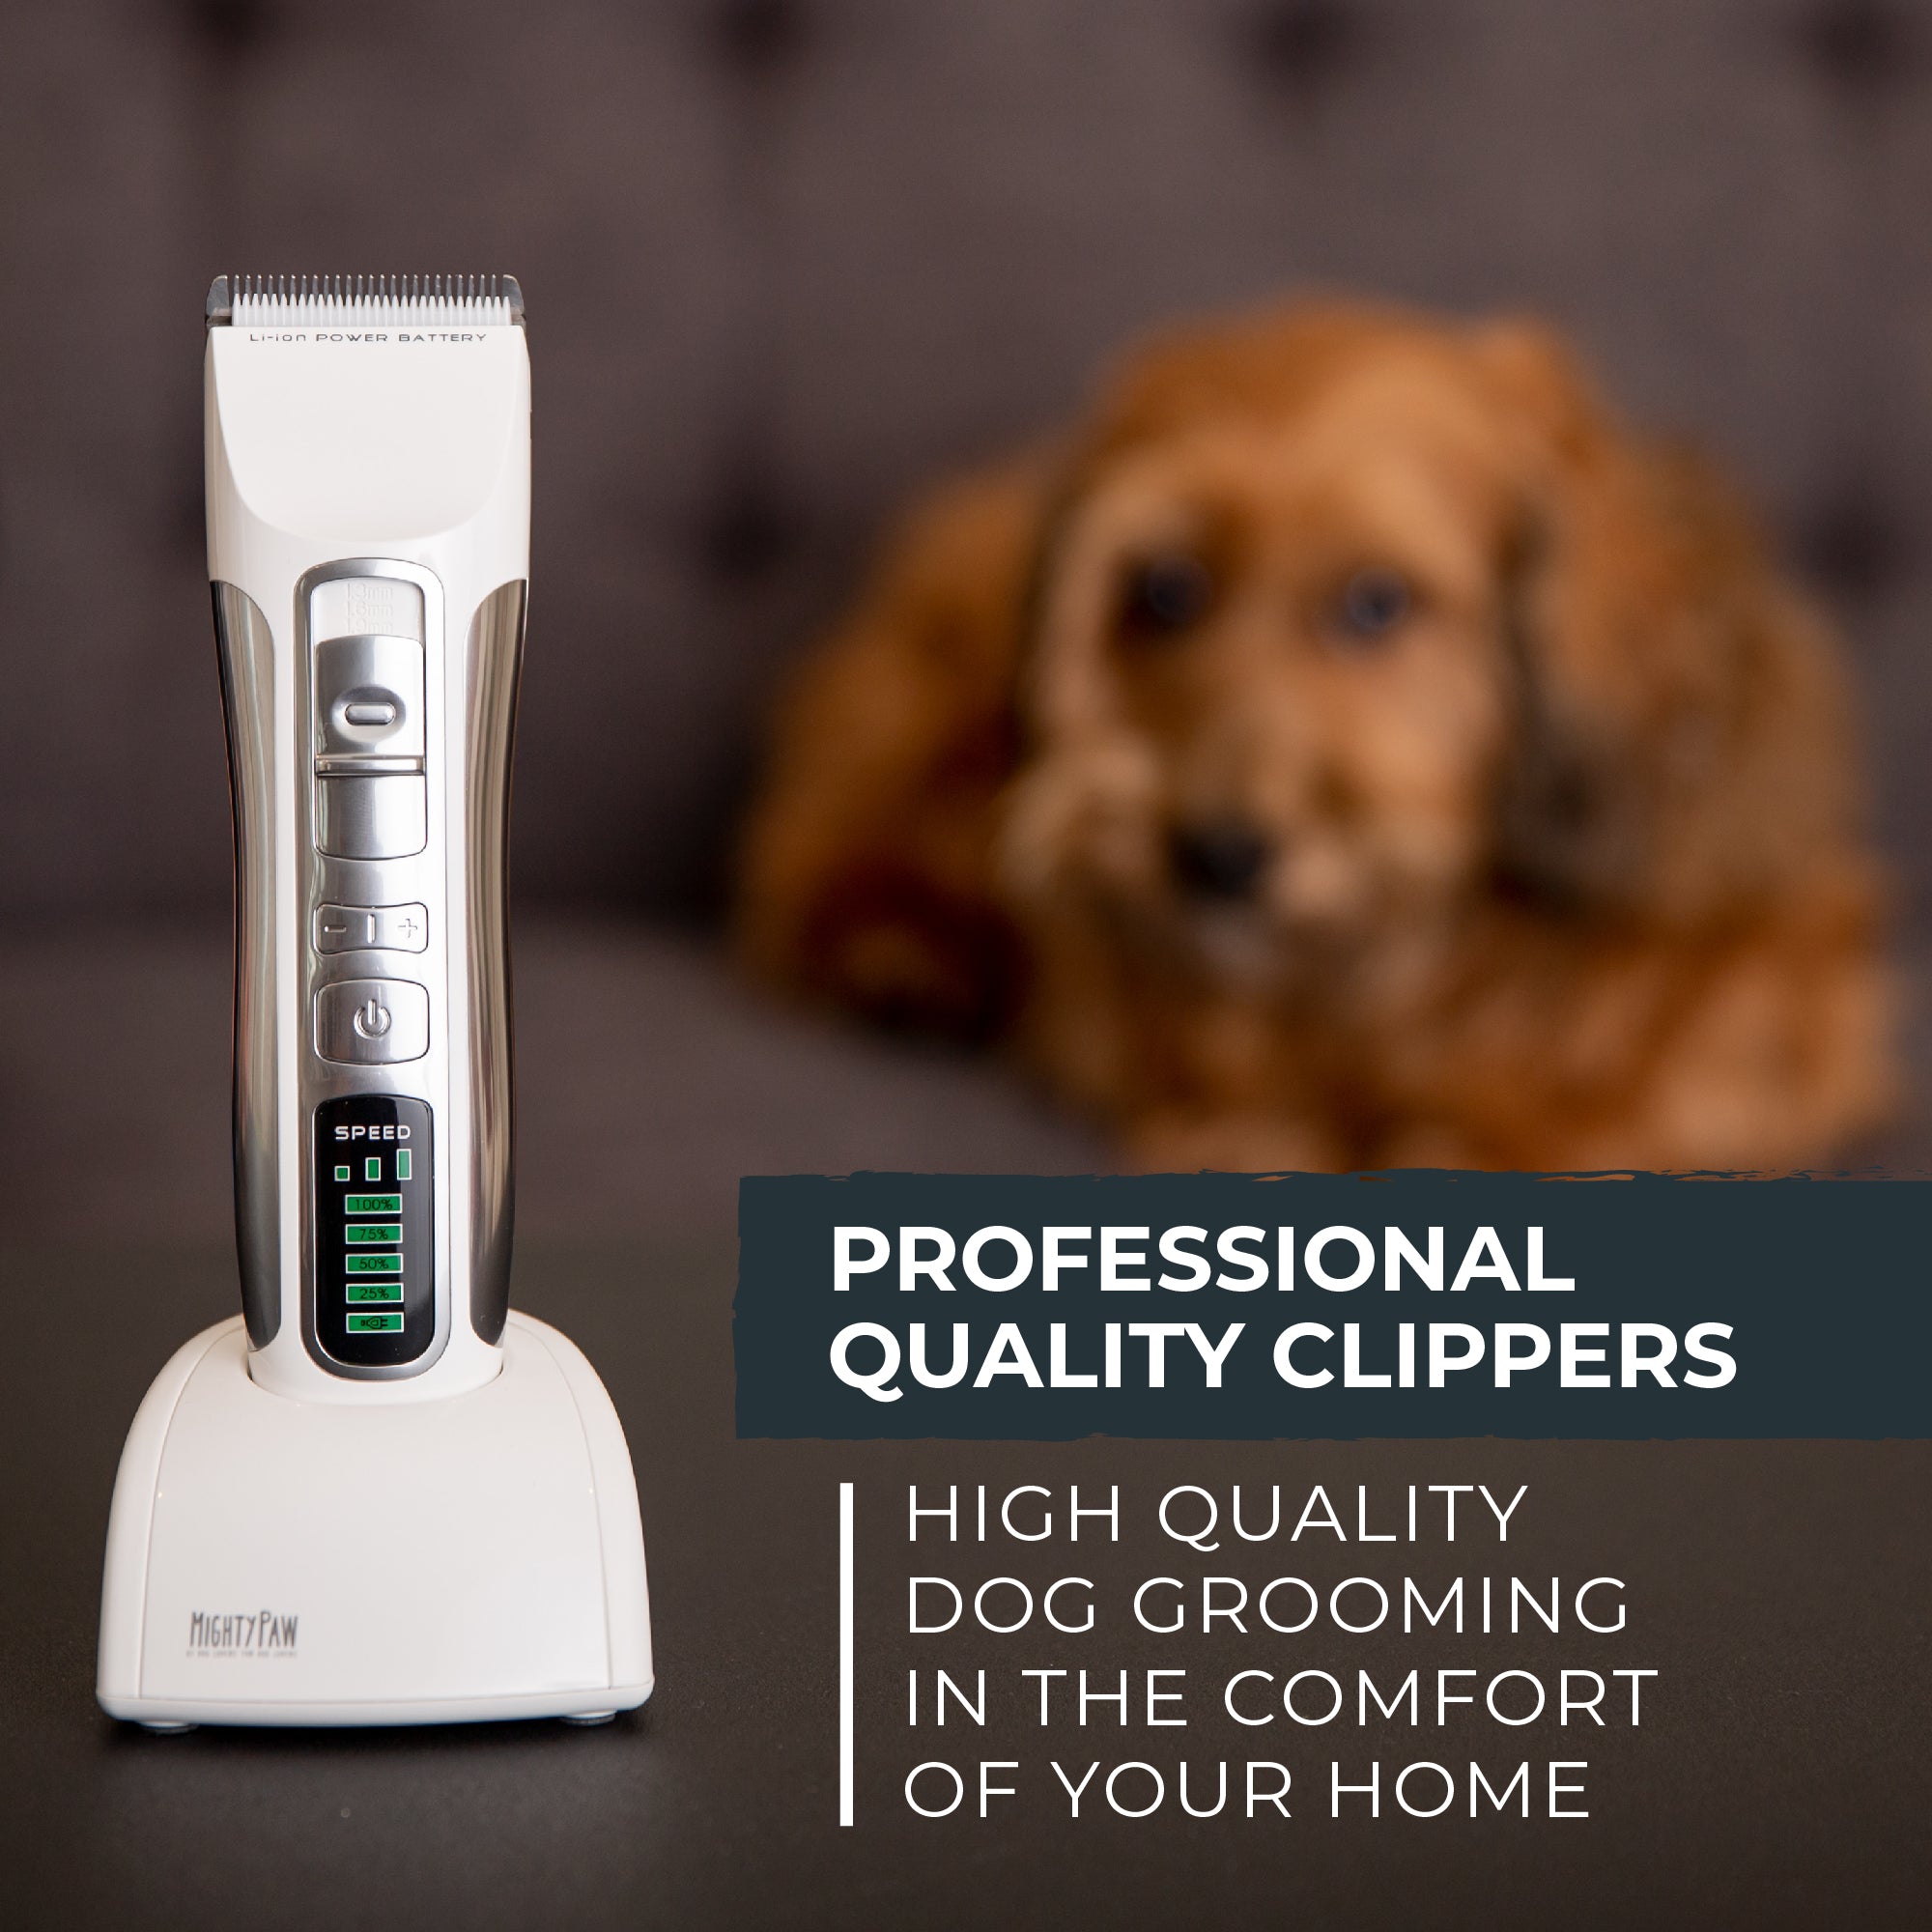 Mighty Paw Professional Cordless Dog Grooming Clippers